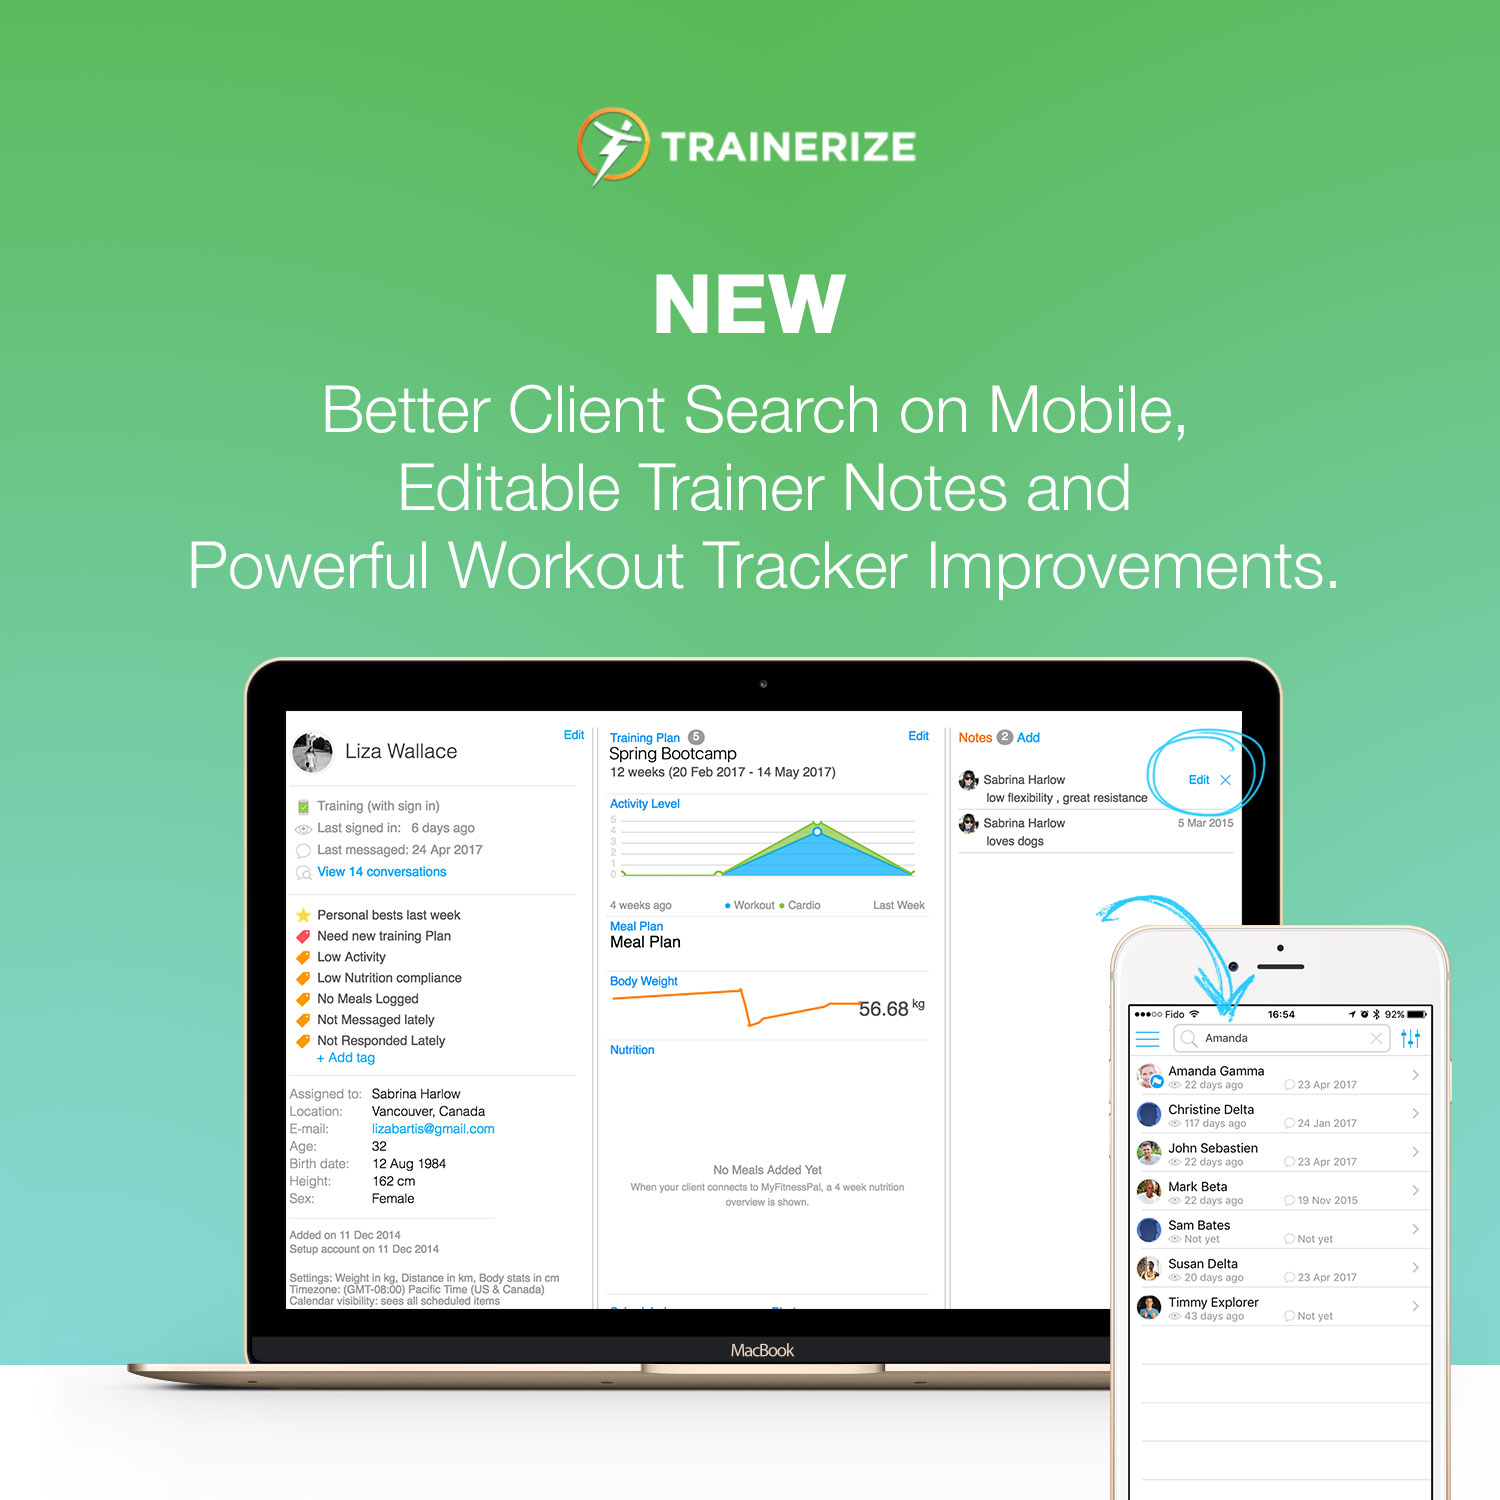 workout tracker, mobile client search, editable trainer notes